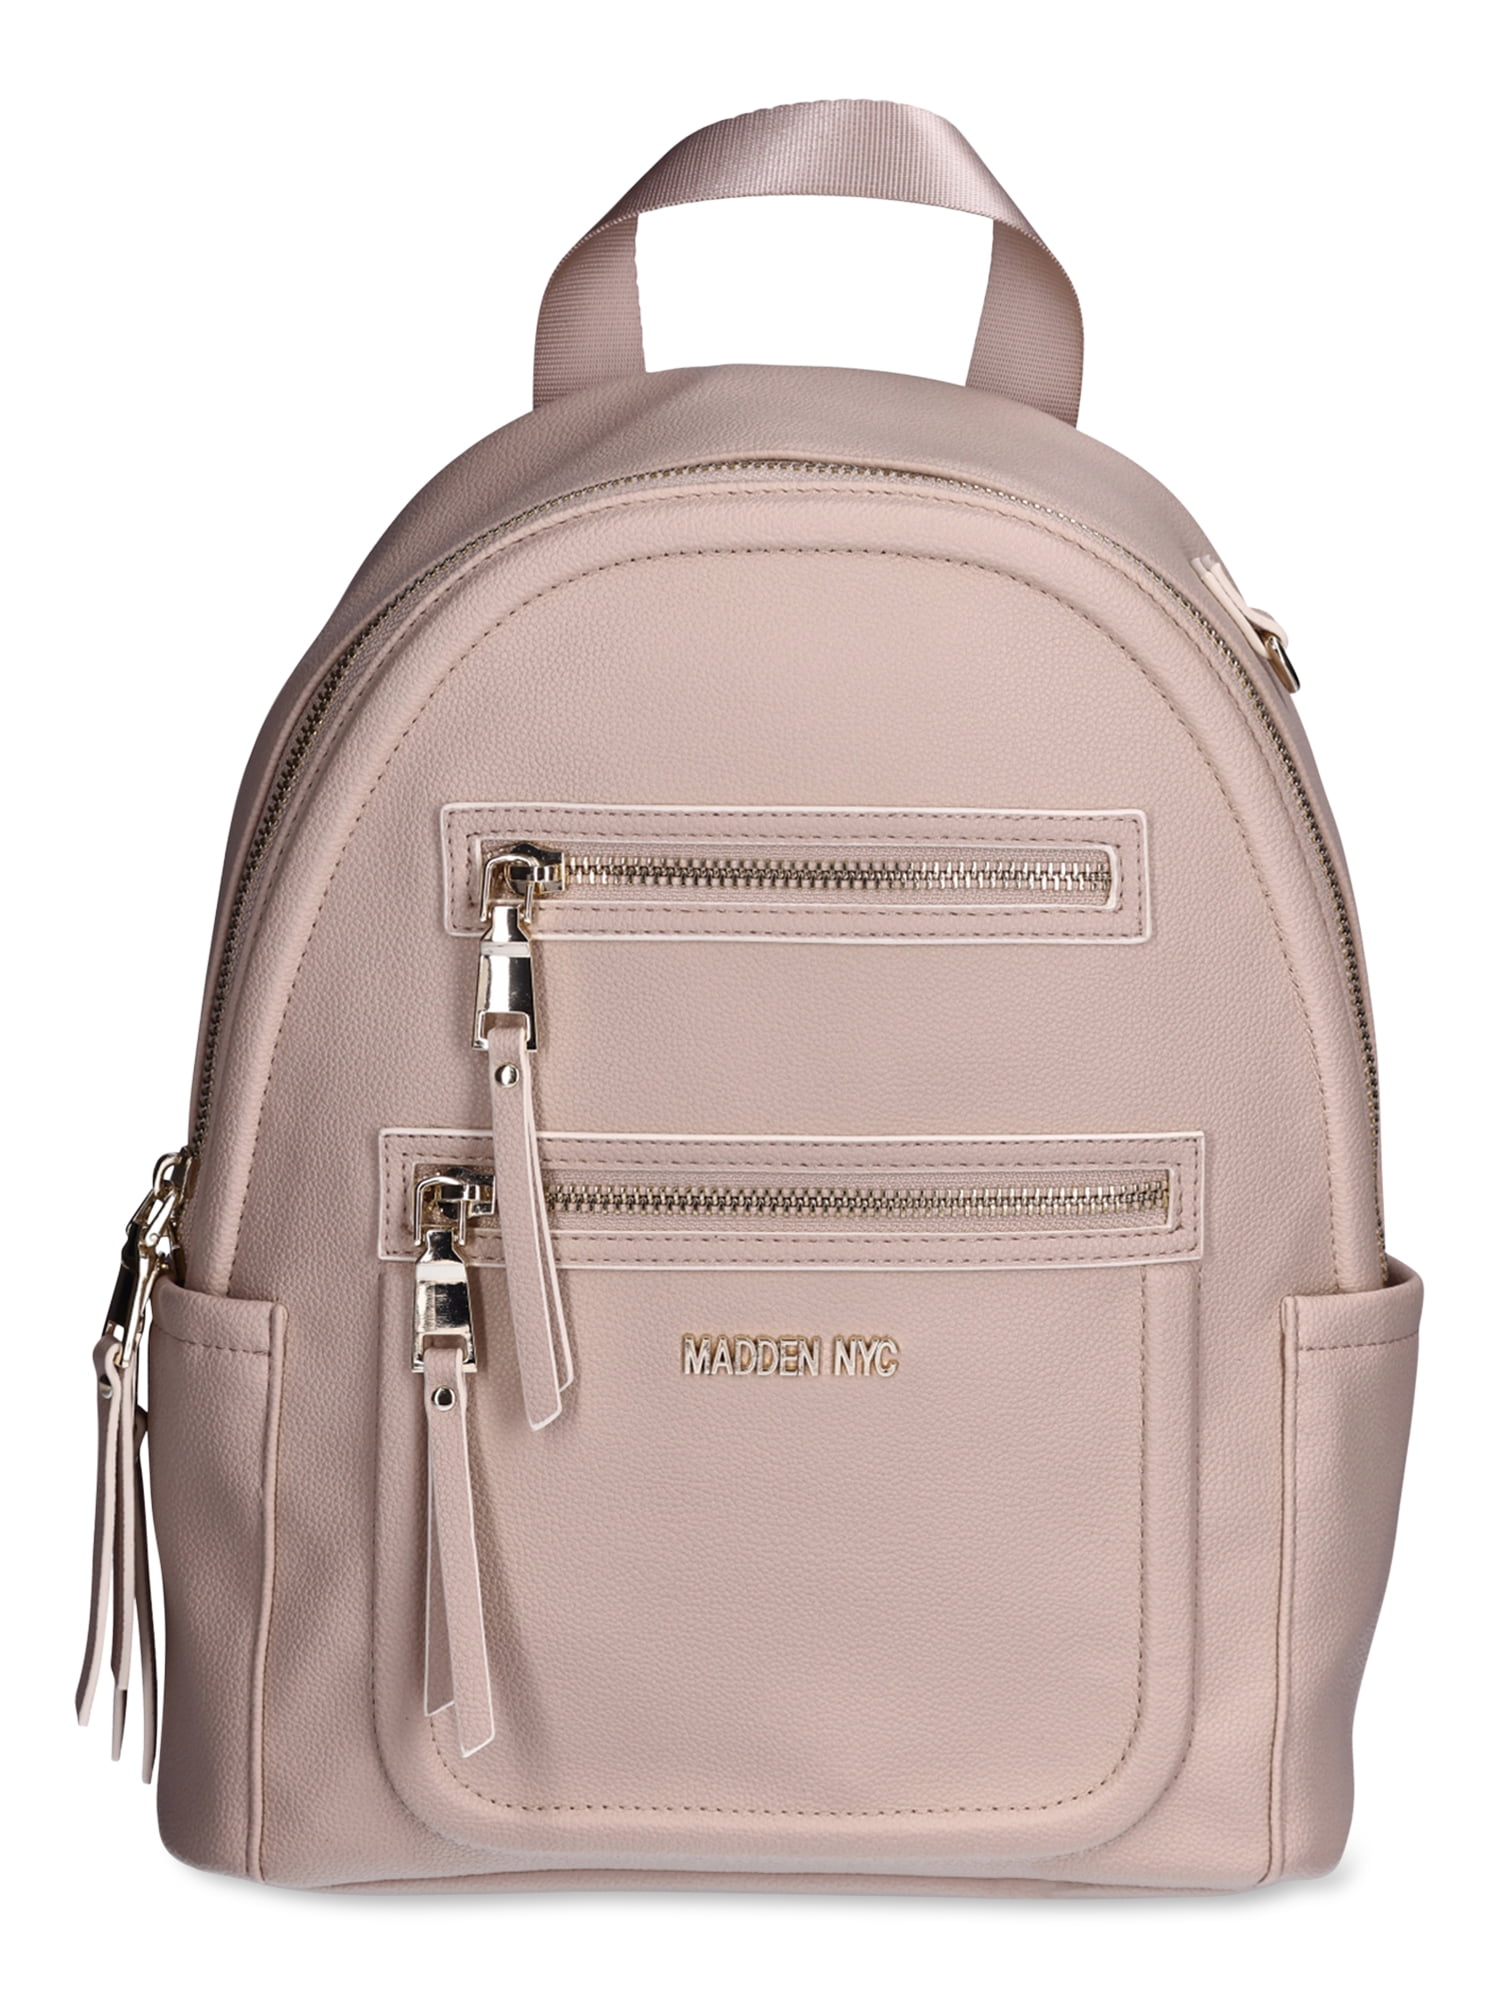 Madden NYC Women's Mini Backpack with Embellished Pouch